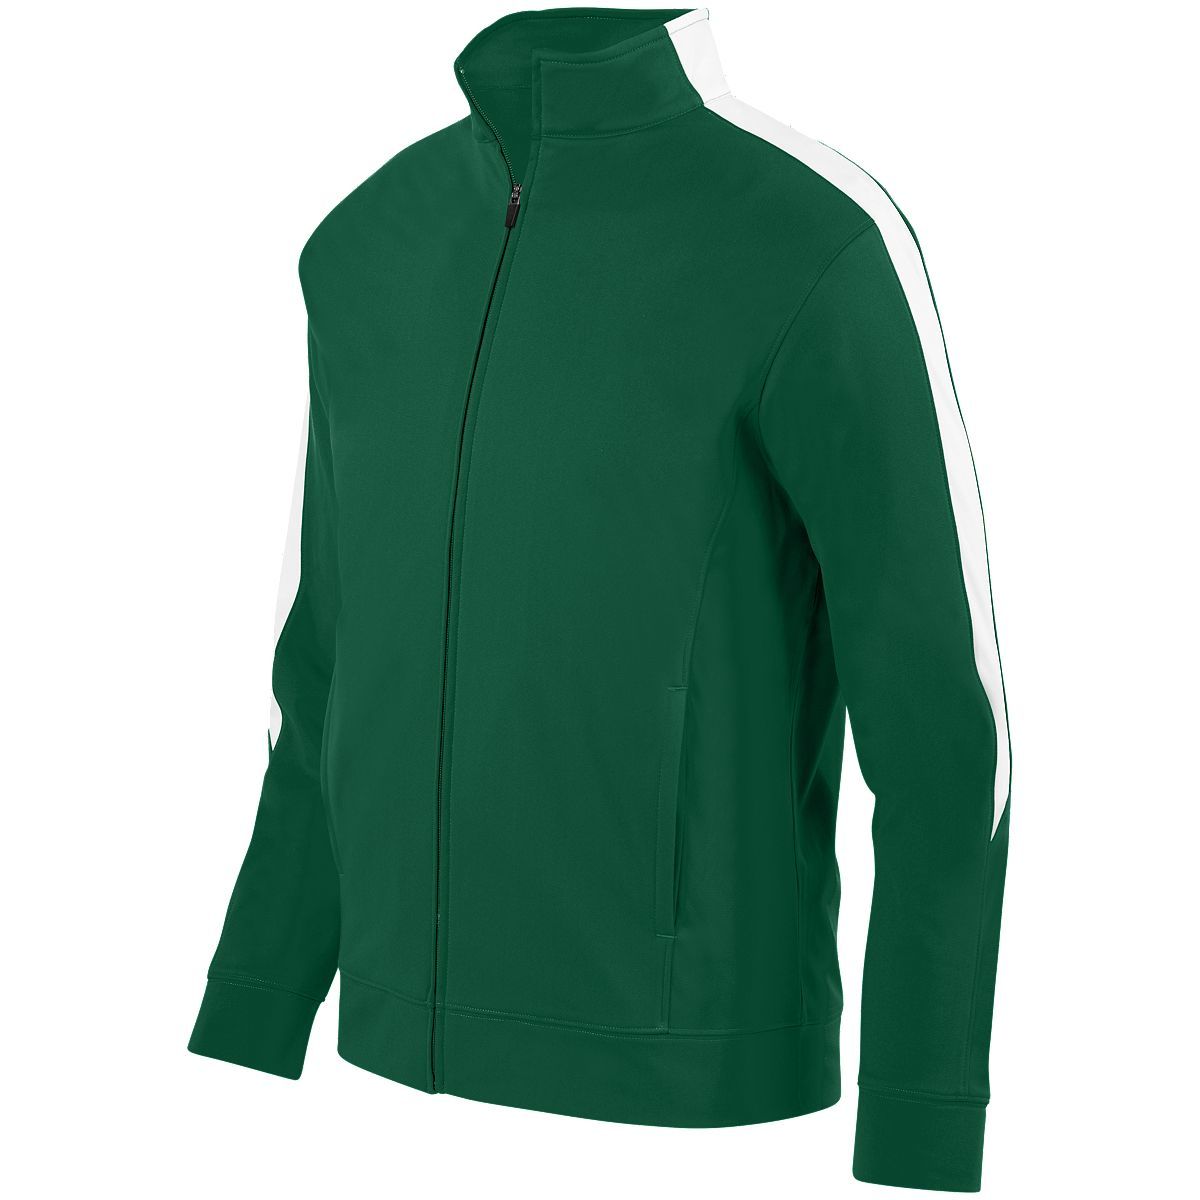 Augusta Sportswear Medalist Jacket 2.0 in Dark Green/White  -Part of the Adult, Adult-Jacket, Augusta-Products, Outerwear product lines at KanaleyCreations.com